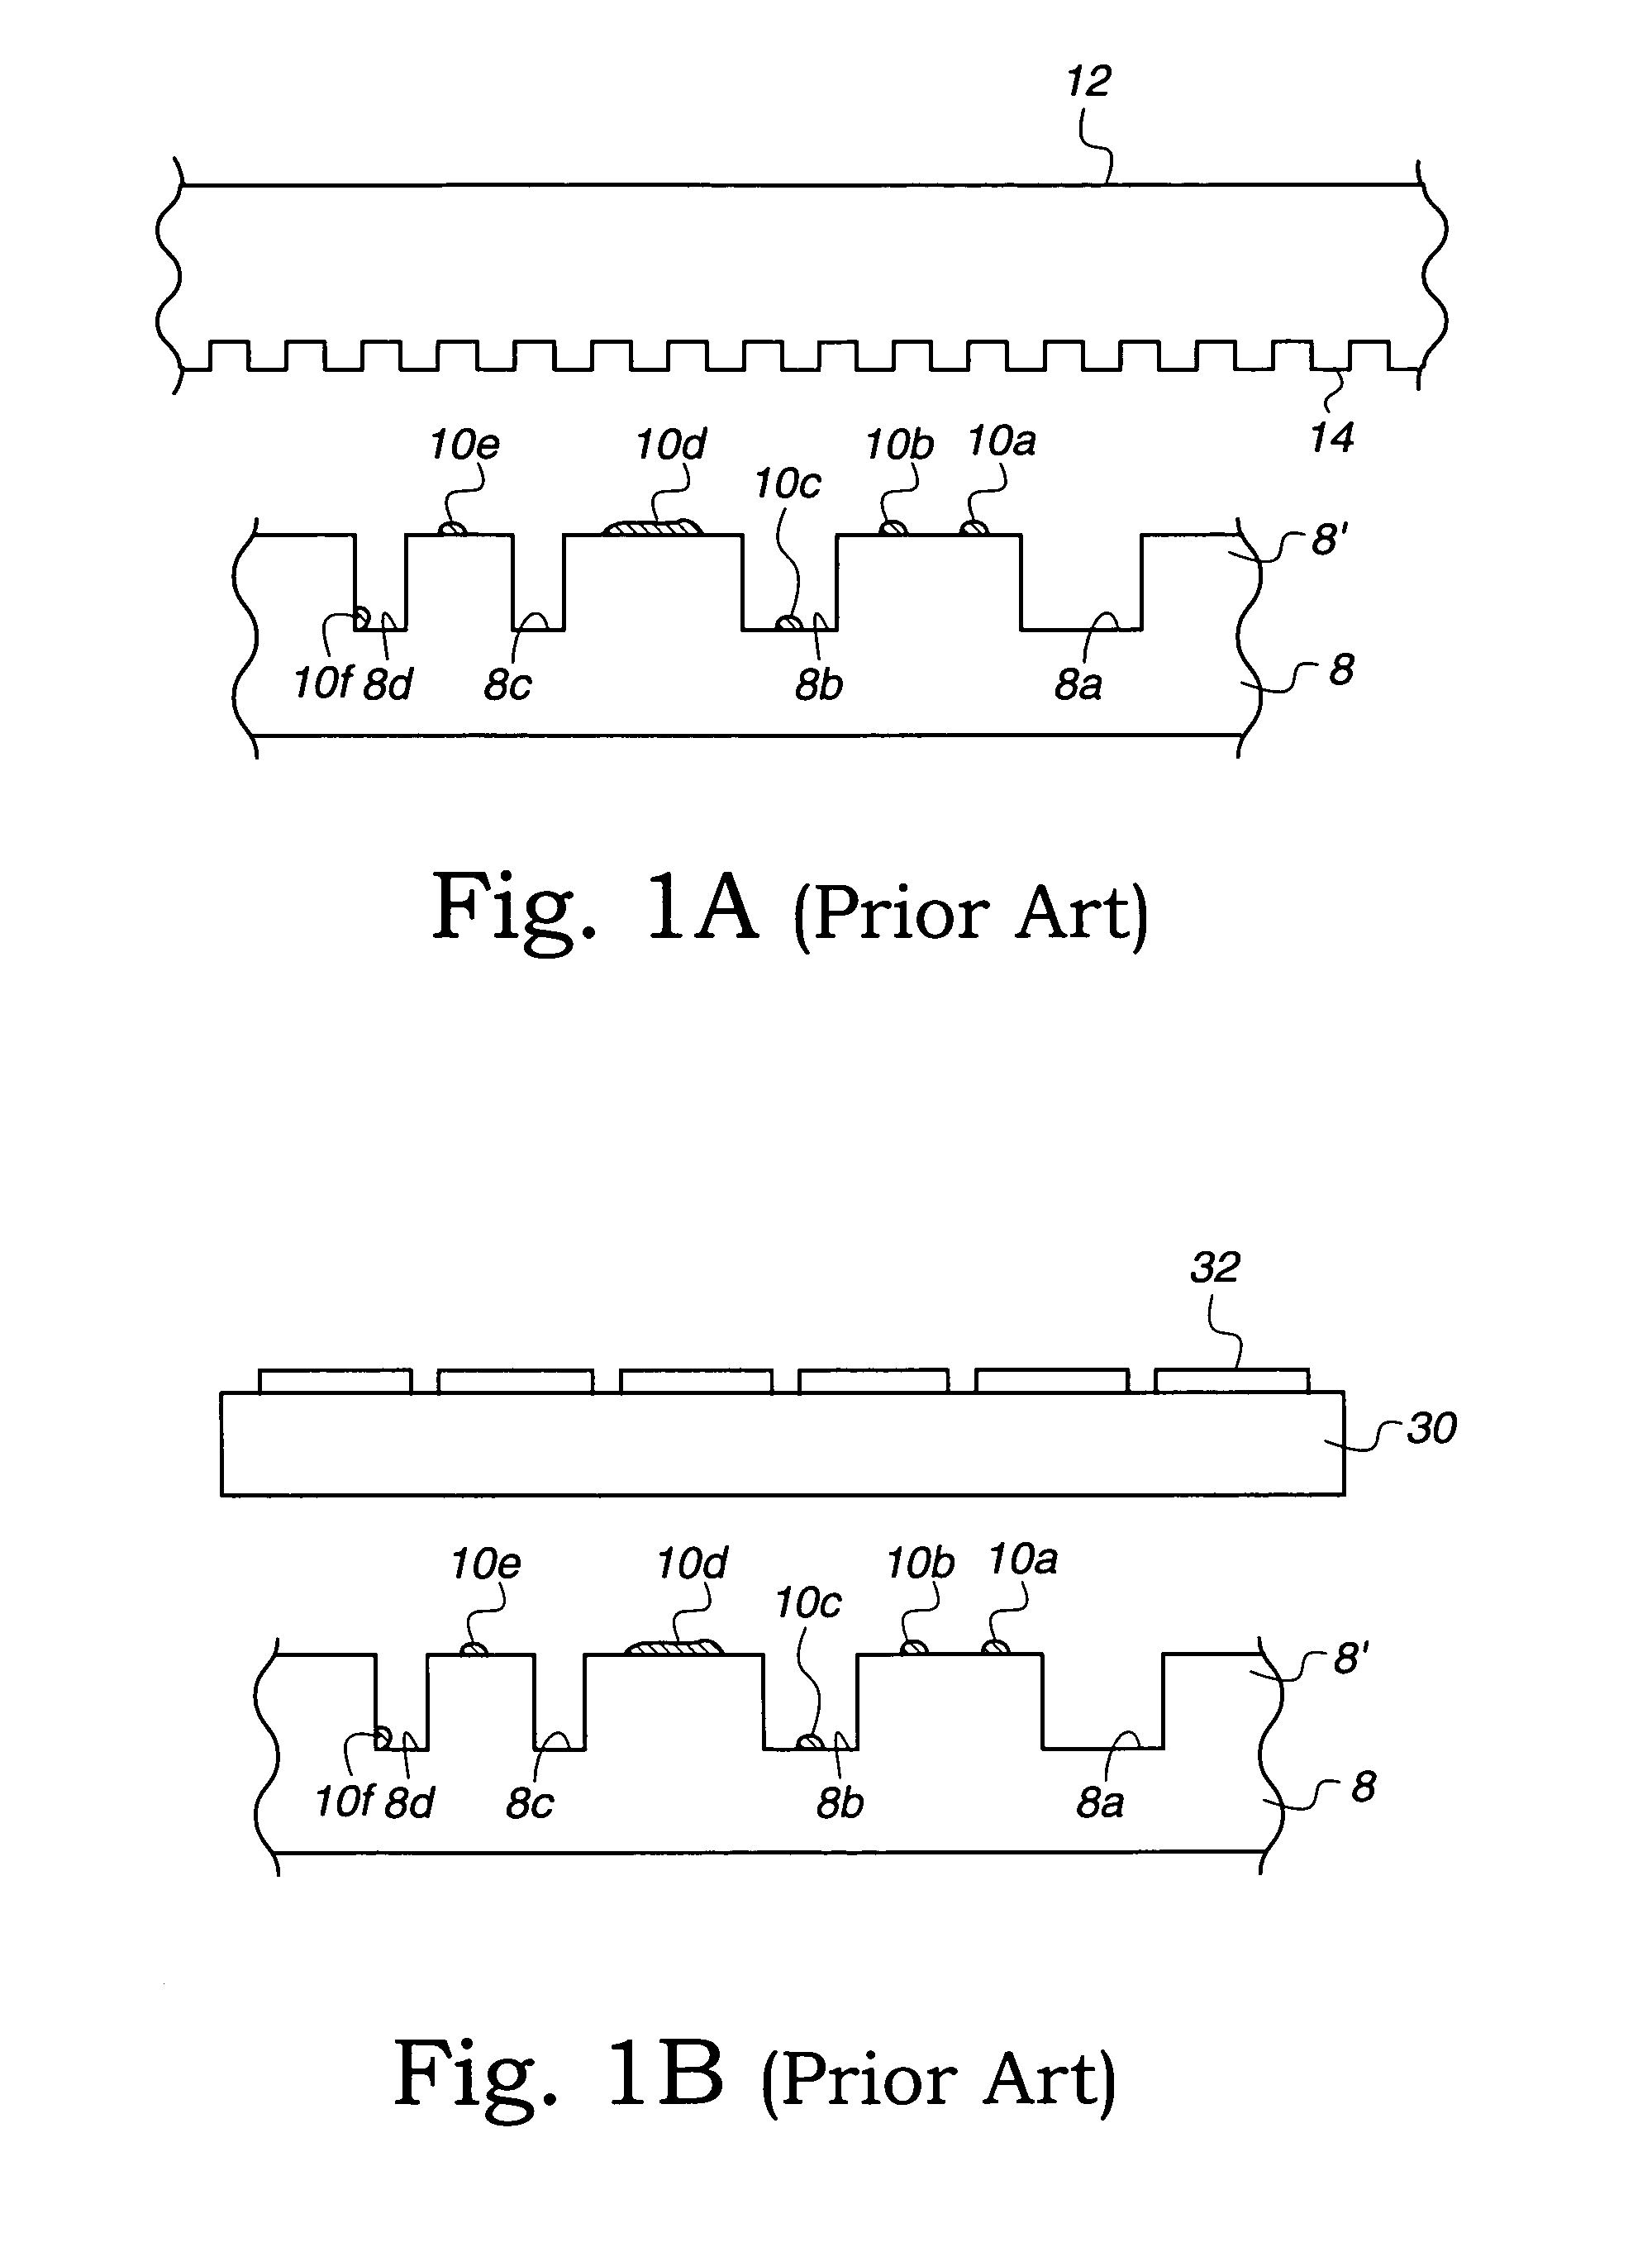 Brush scrubbing-high frequency resonating substrate processing system